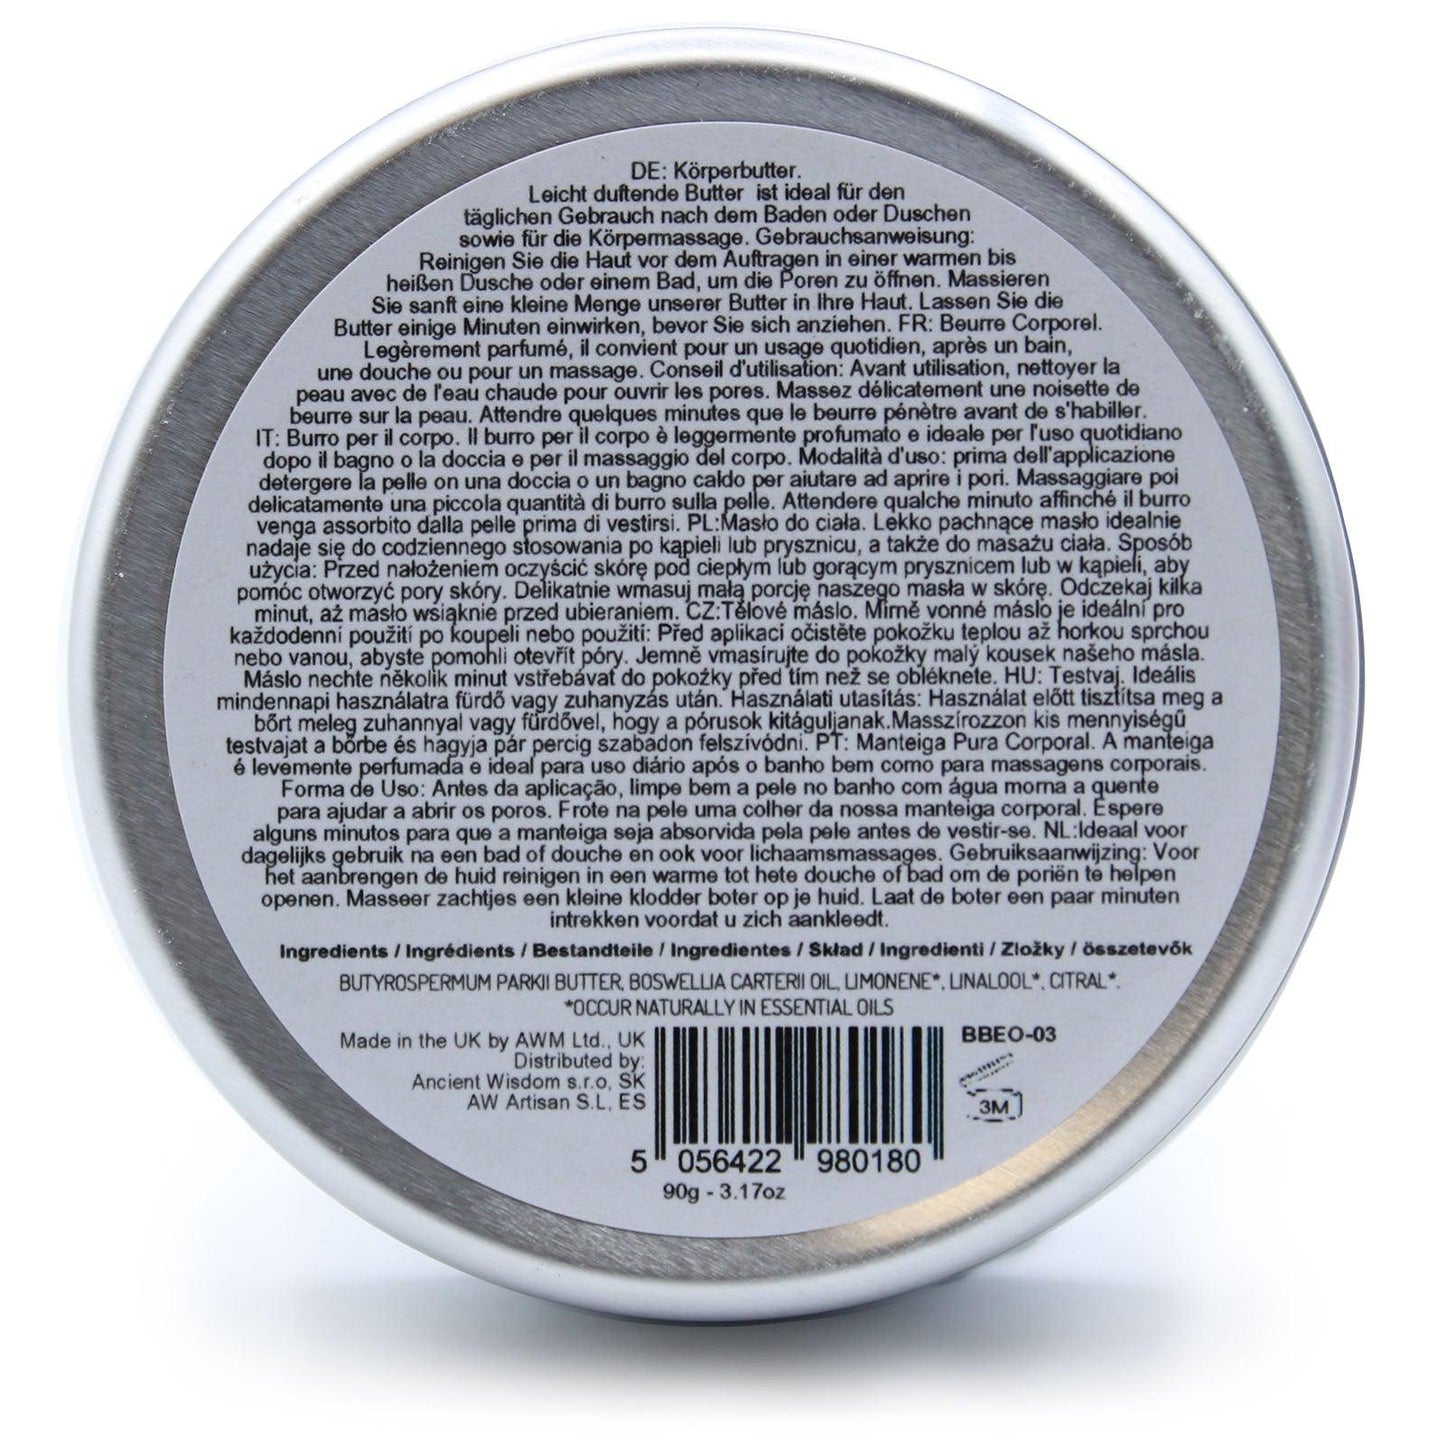 Aromatherapy Shea Body Butter 90g - Frankincense - DuvetDay.co.uk